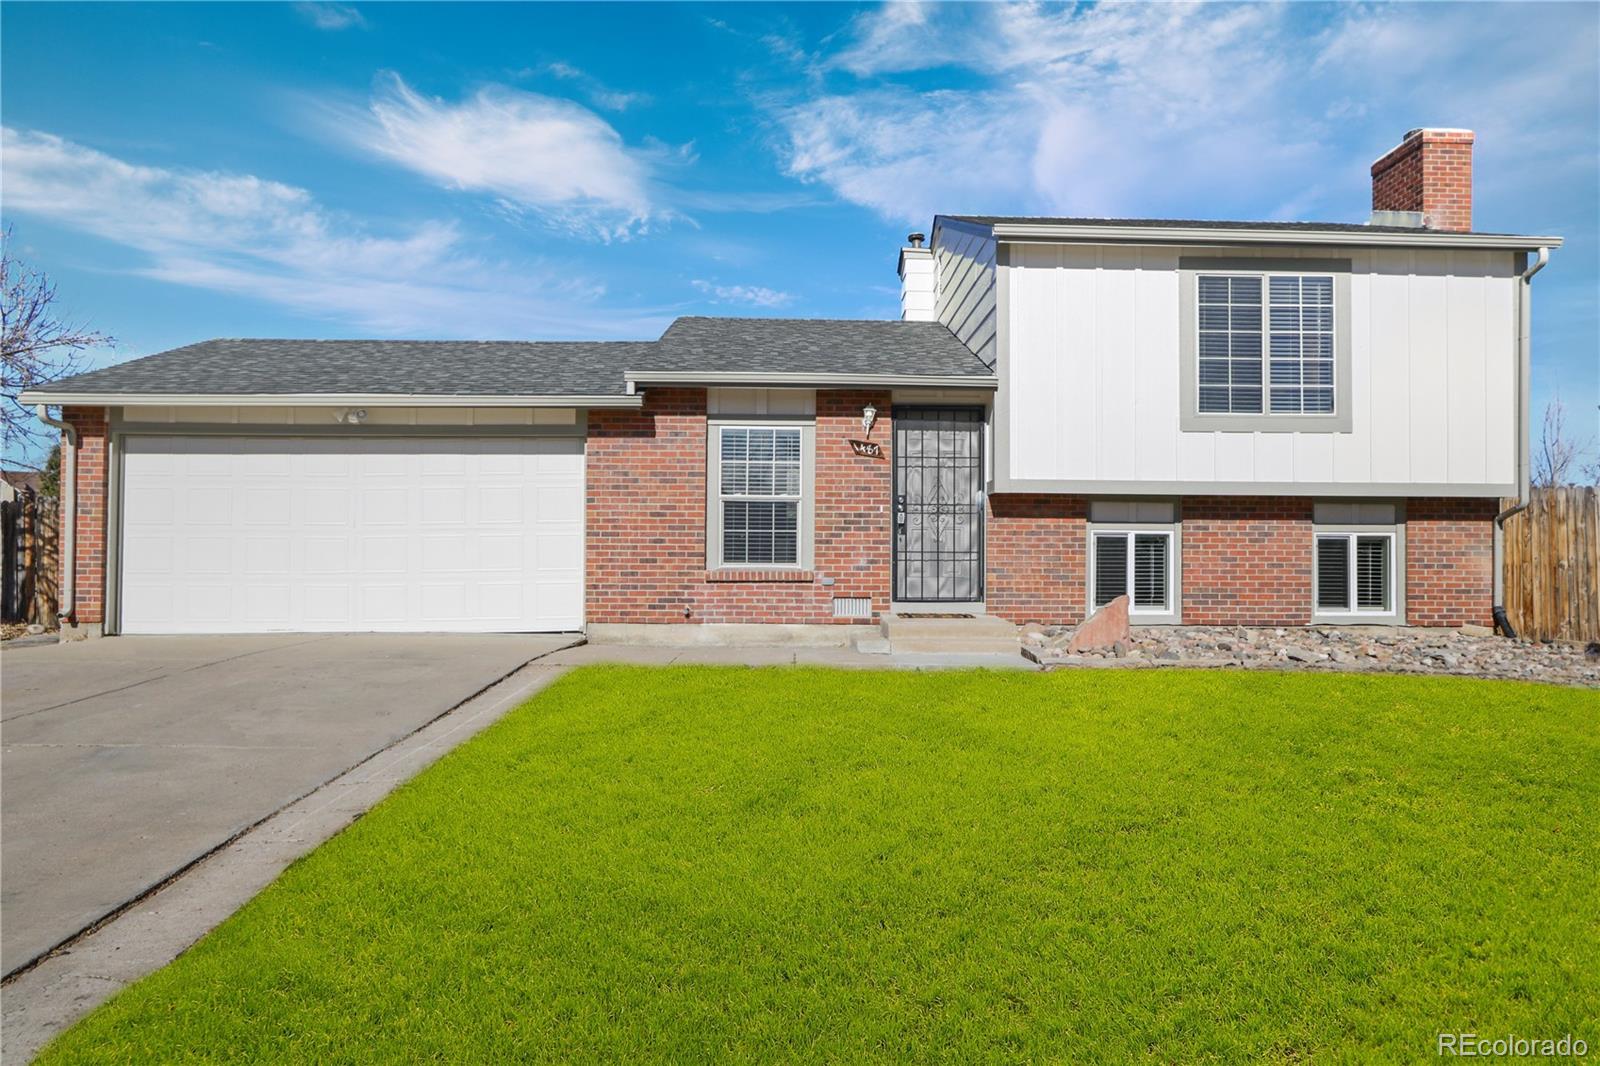 1487 s andes way, Aurora sold home. Closed on 2024-02-09 for $469,815.